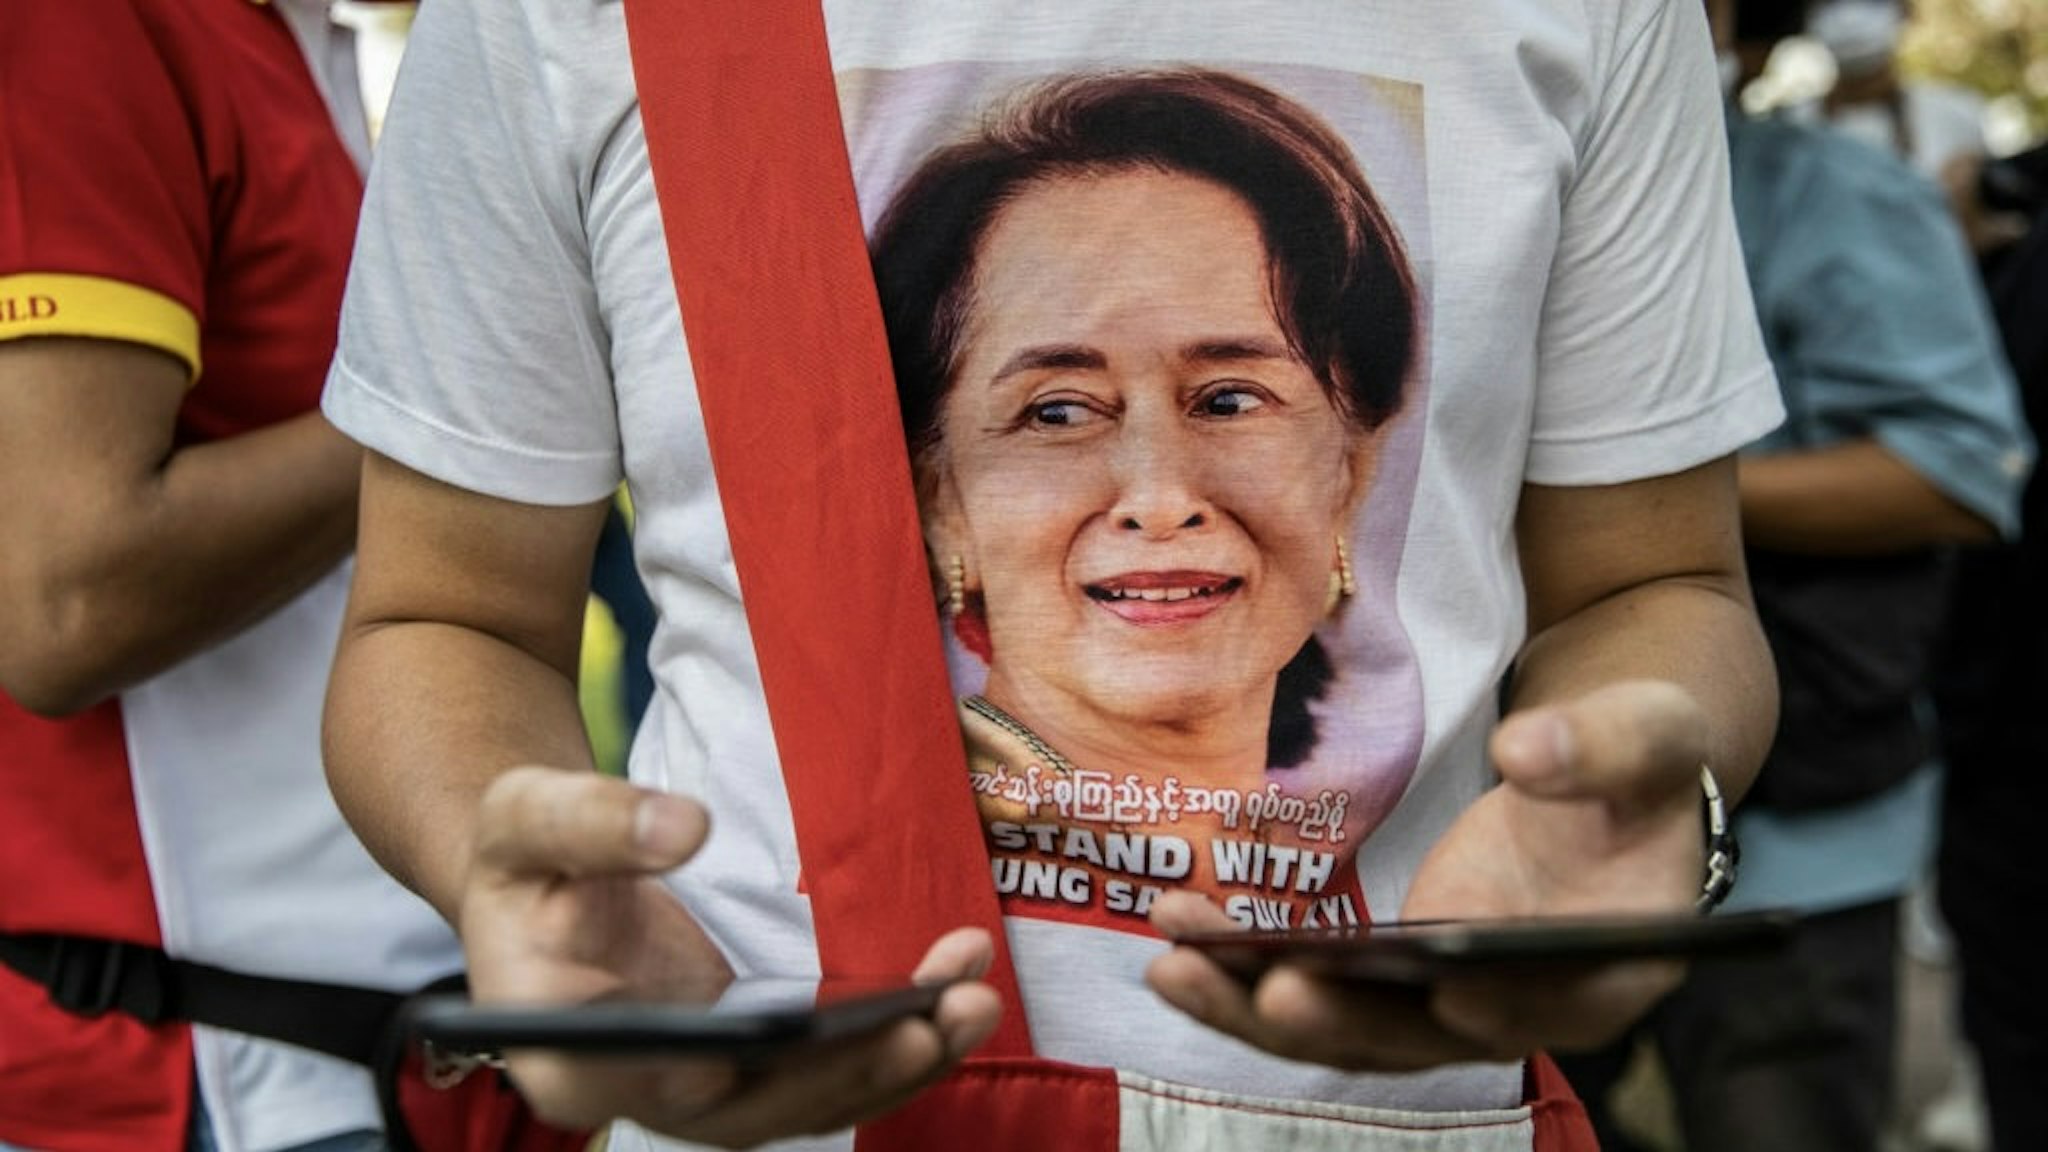 Myanmar Nationals Protest Outside UN Building BANGKOK, THAILAND - FEBRUARY 03: A Myanmar anti-coup protester wears an Aung San Suu Kyi shirt at a rally in front of the United Nations on February 03, 2021 in Bangkok, Thailand. Burmese migrants in Thailand gathered outside the United Nations headquarters for Southeast Asia as they continued to protest the Myanmar military's coup d'etat on Monday. The Tatmadaw, the country's military, suspended the government and arrested several figures including de-facto leader Aung San Suu Kyi, citing election fraud. (Photo by Lauren DeCicca/Getty Images) Lauren DeCicca / Stringer via Getty Images